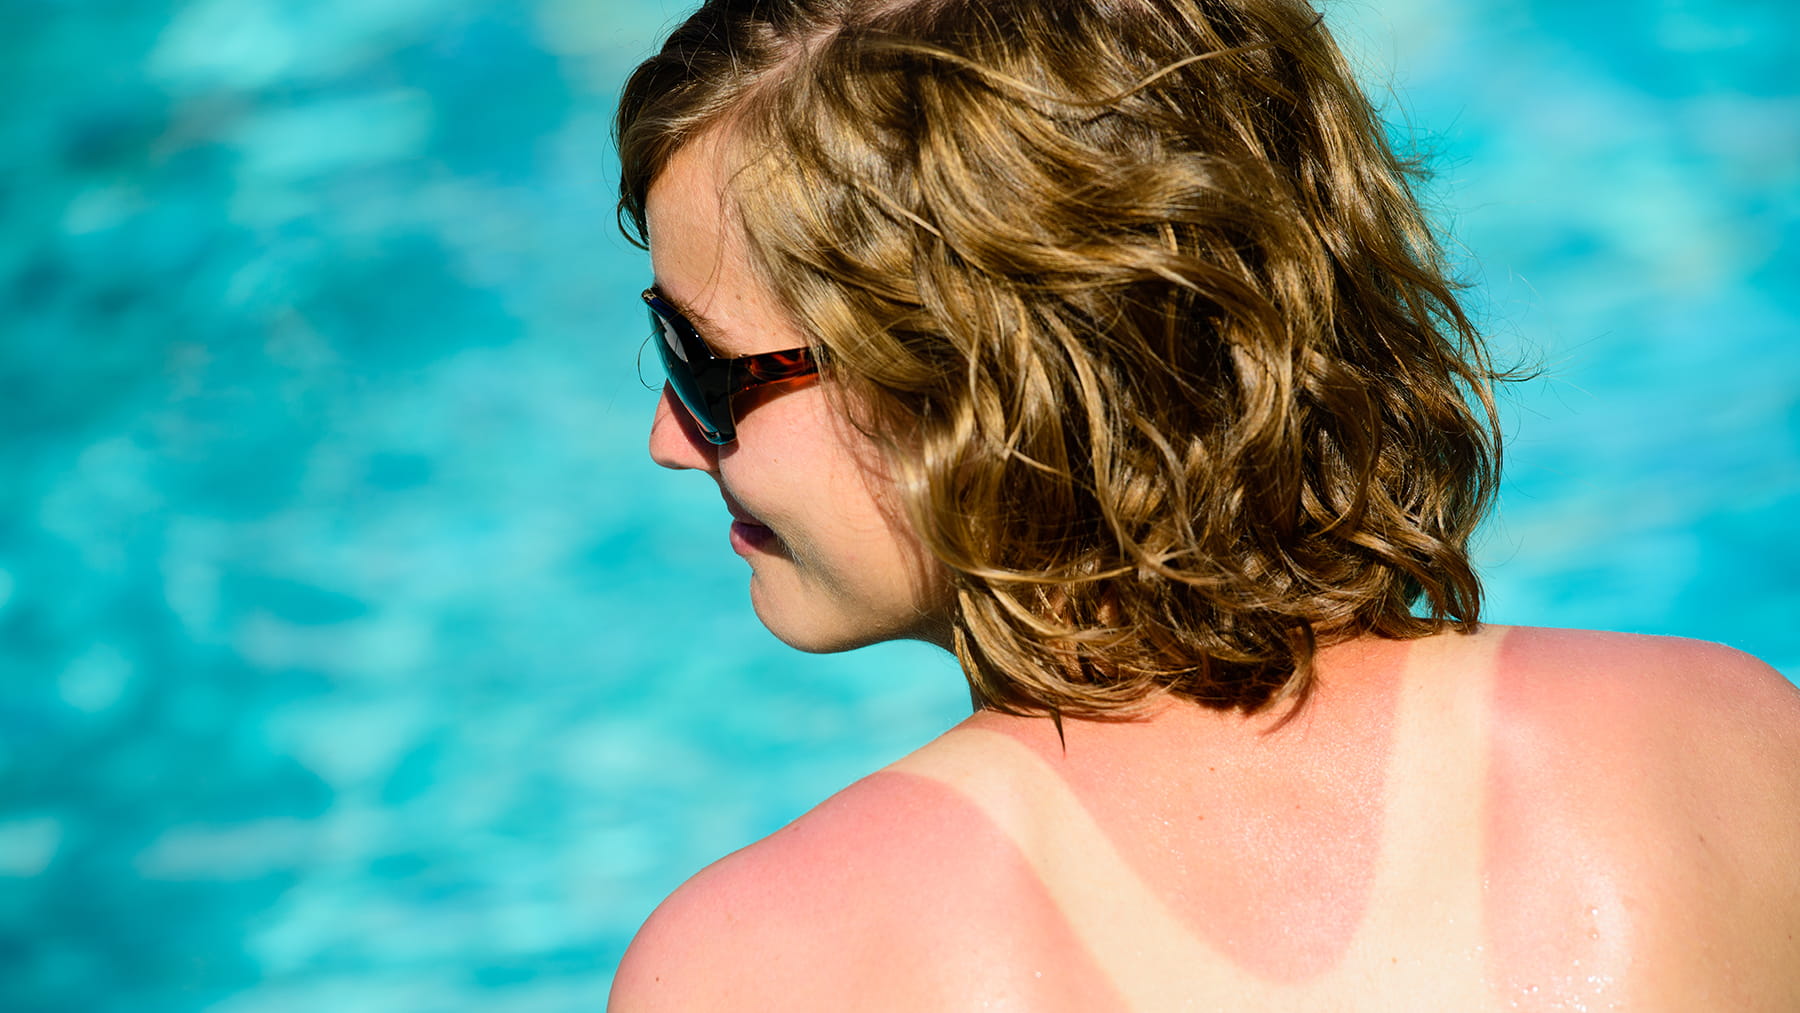 Does Red Light Therapy Help Sunburn?